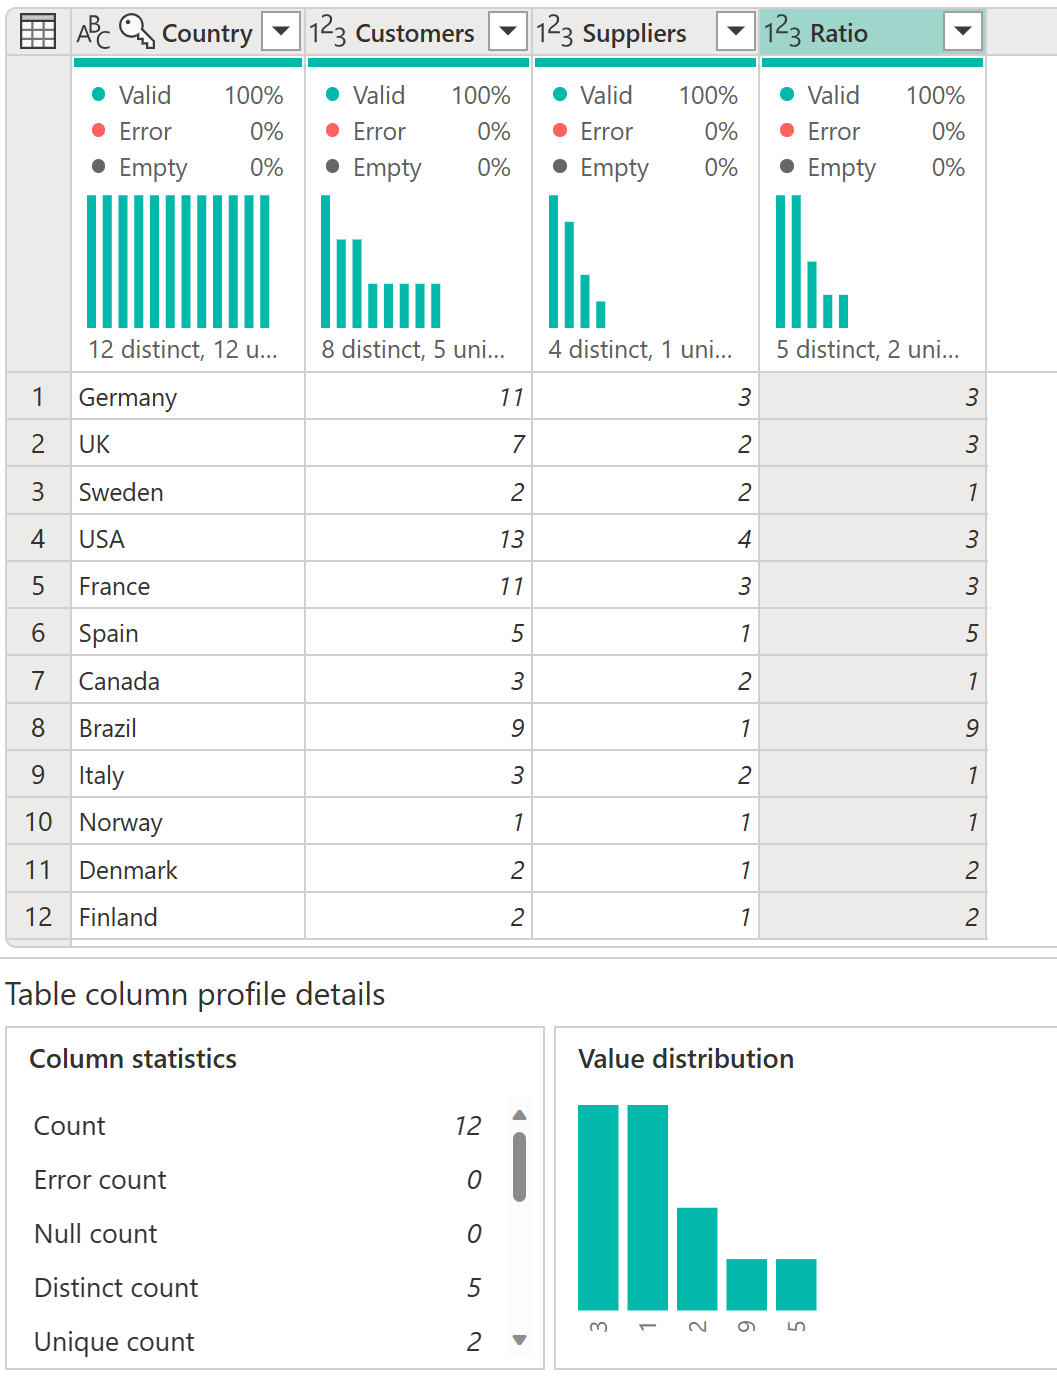 Screenshot of the data profiling information with details for the Ratio column at the bottom.